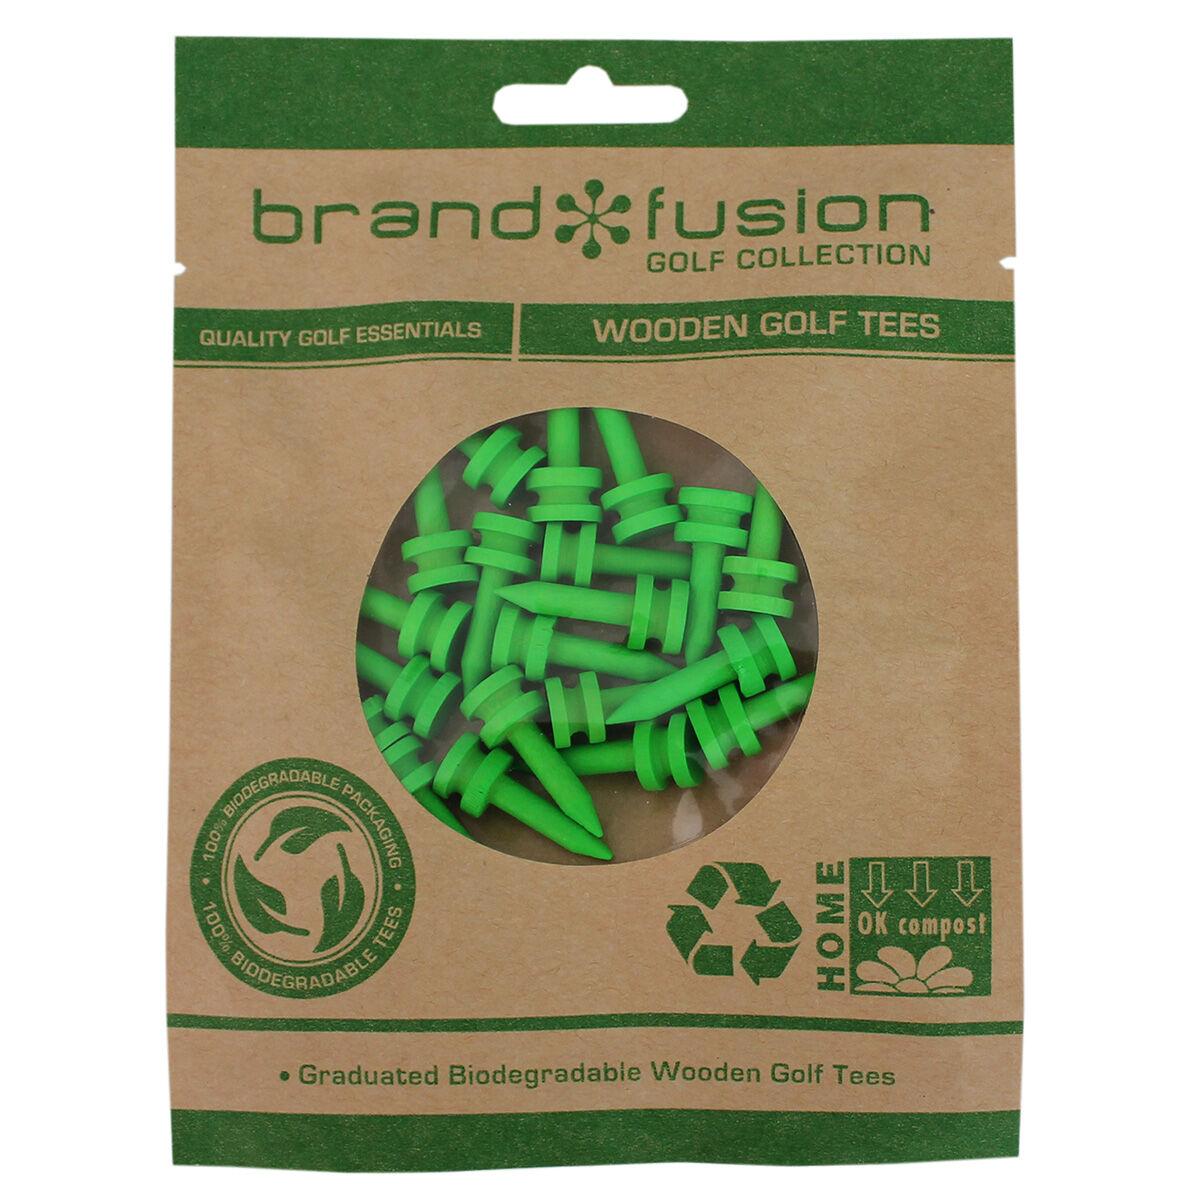 Brand Fusion Graduated Biodegradable Wooden Golf Tees, Mens, Lime/green, 27mm | American Golf von Brand Fusion